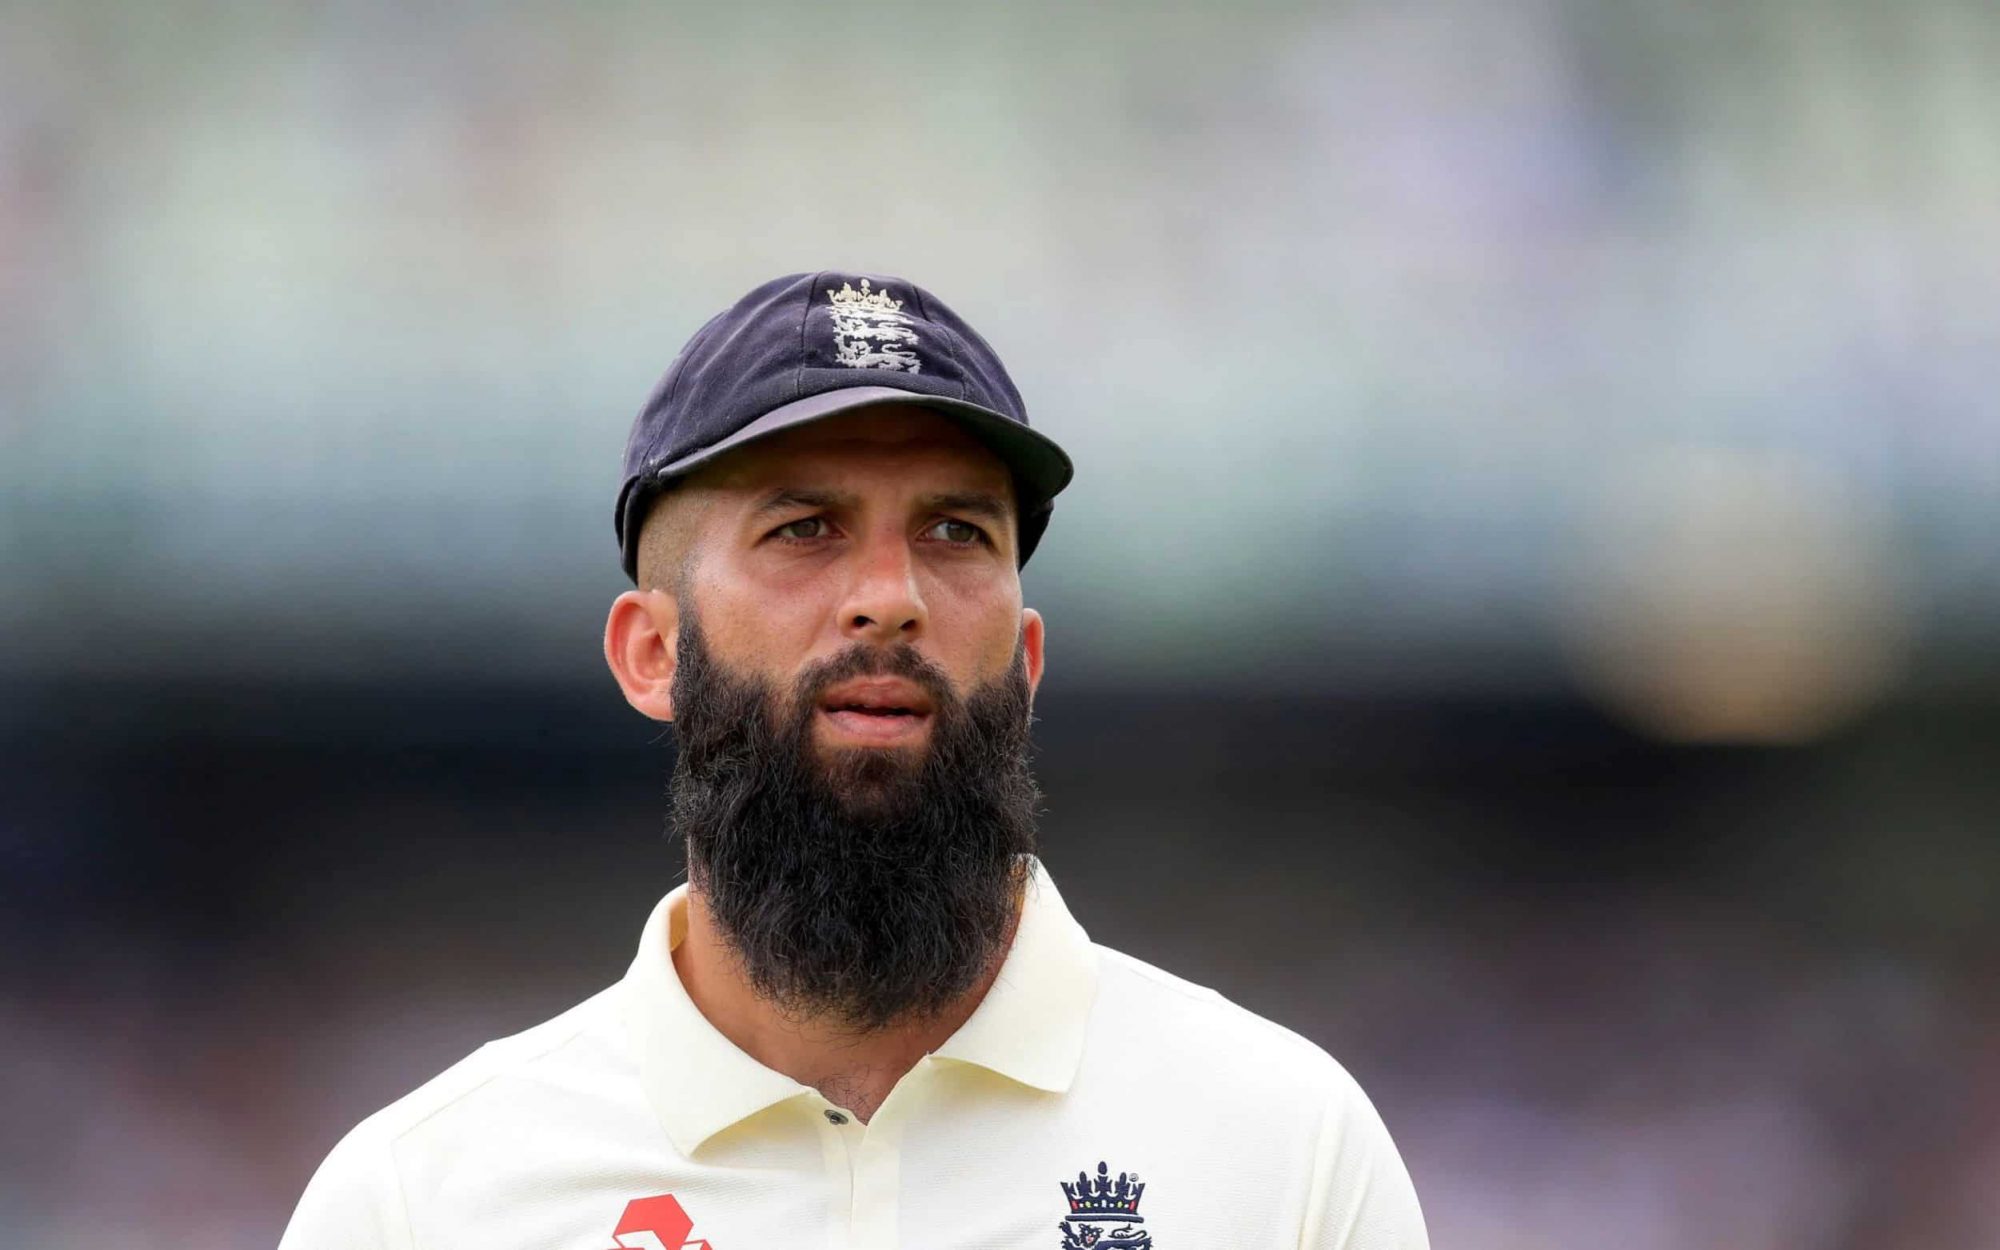 Moeen Ali To Announce Retirement From Test Cricket To Focus On White-Ball Cricket